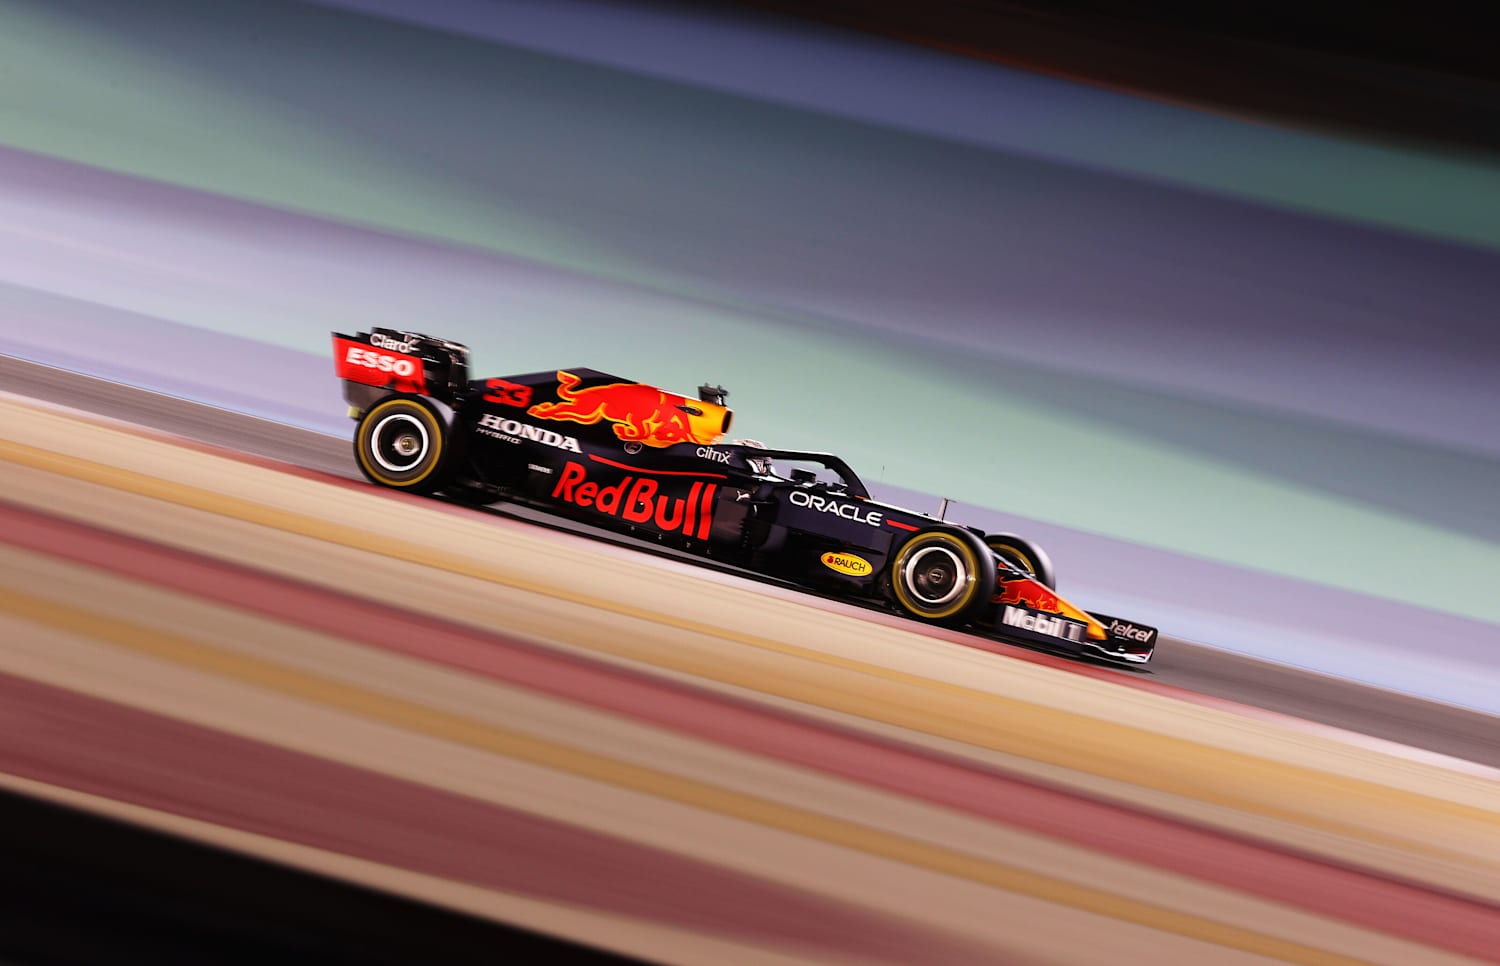 Bahrain Grand Prix 21 Race Report And Reaction